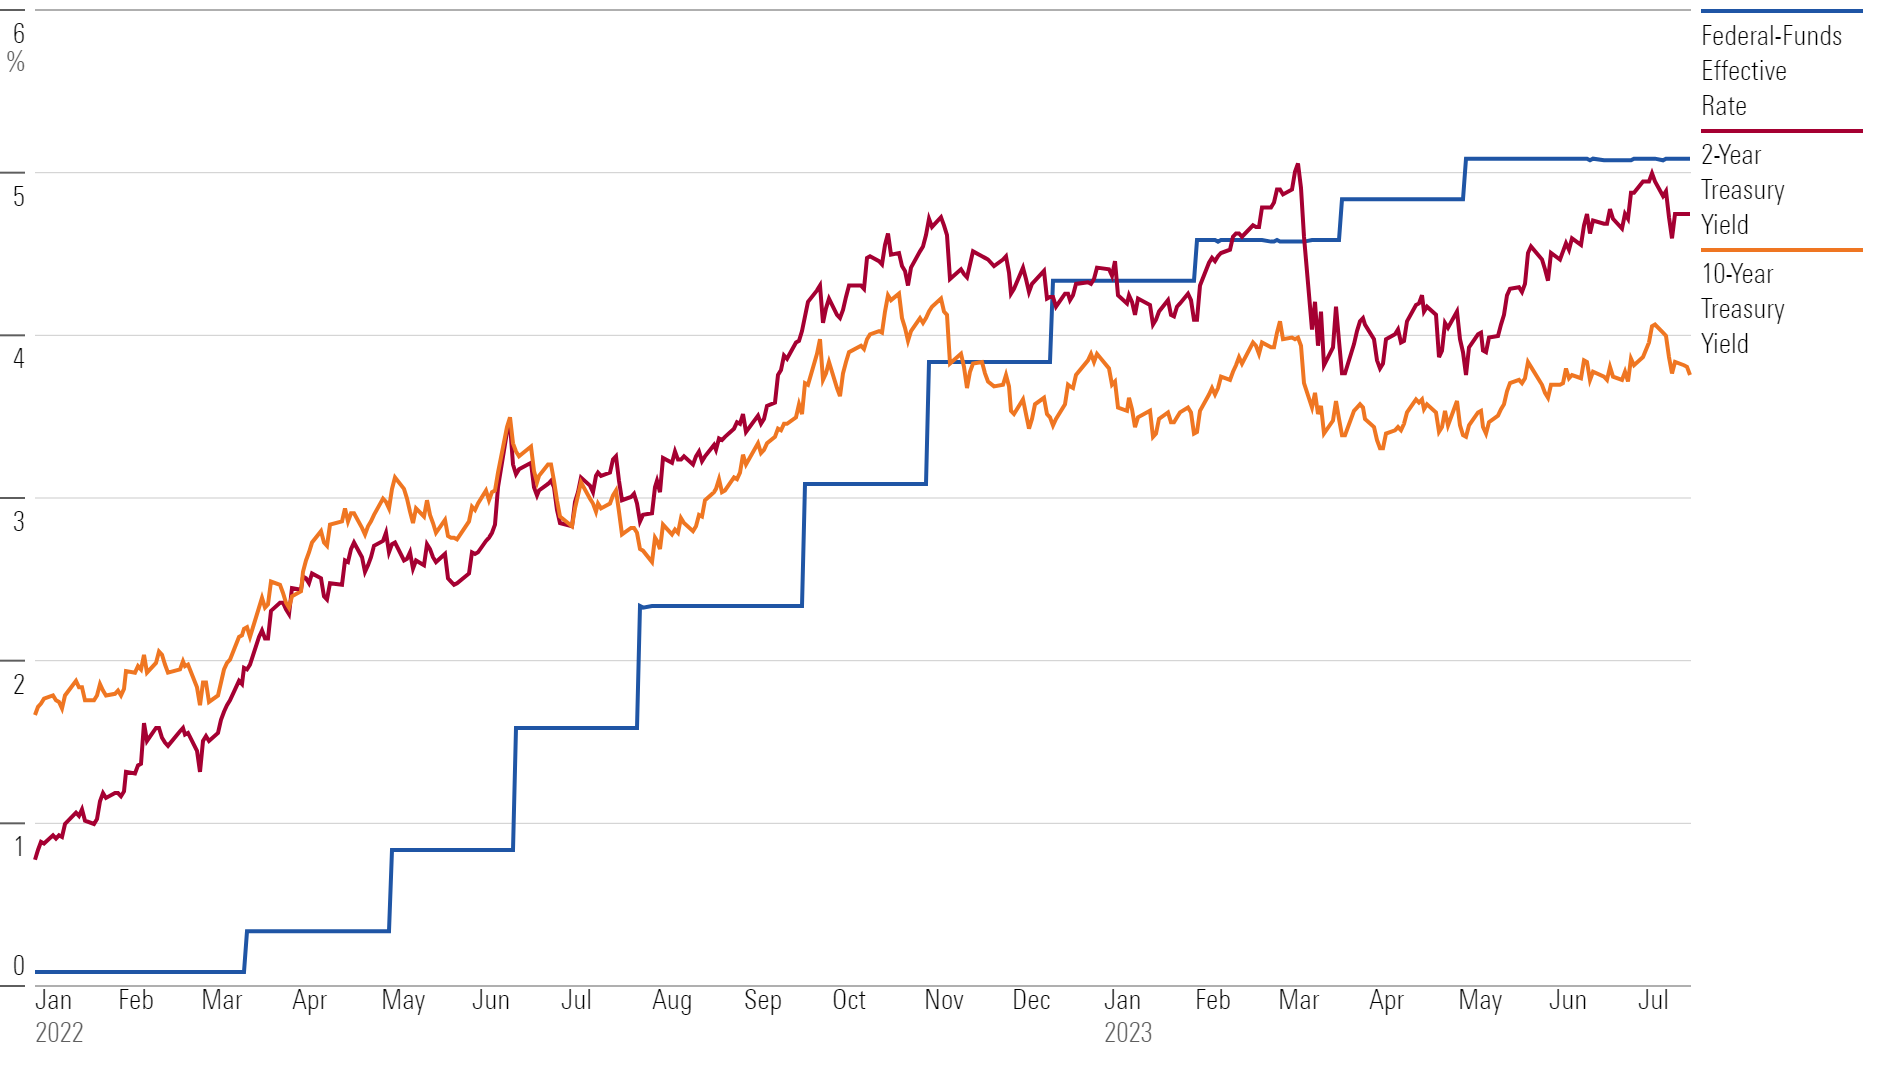 Line chart showing changes in the federal-funds rate along with yields on the U.S. Treasury 2-year and 10-year note.